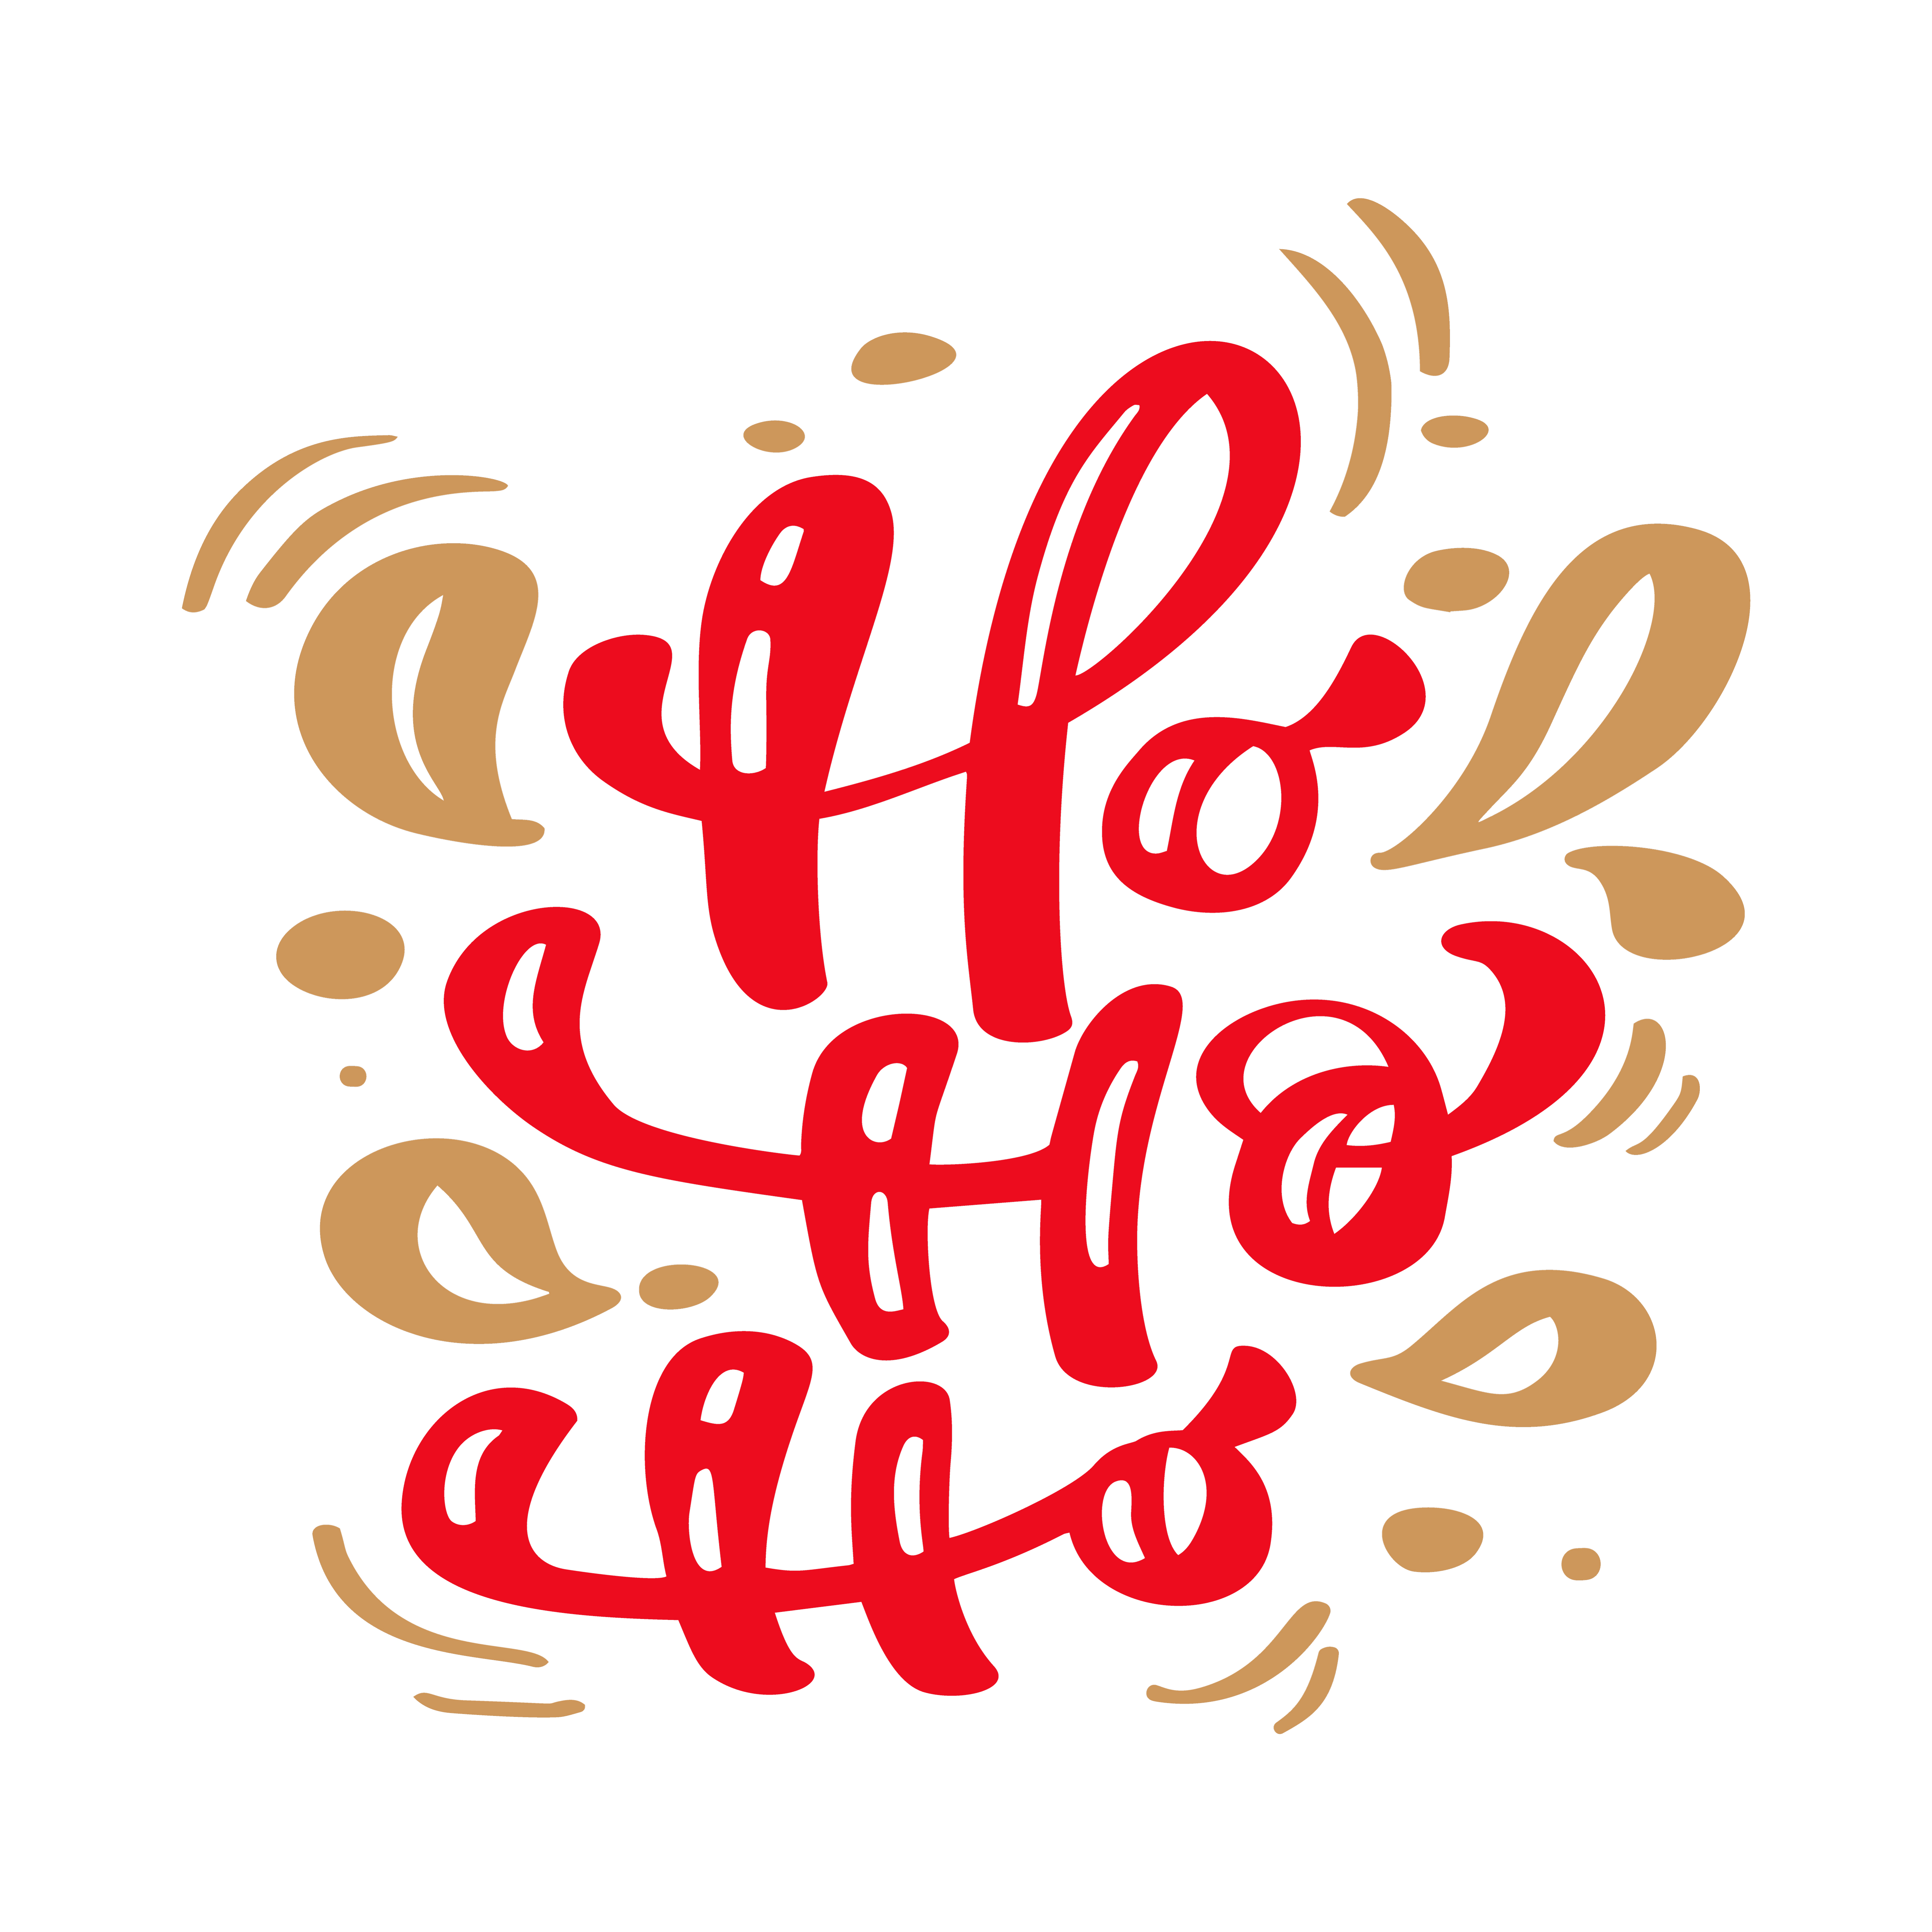 Ho ho ho red Christmas vintage calligraphy lettering vector text with